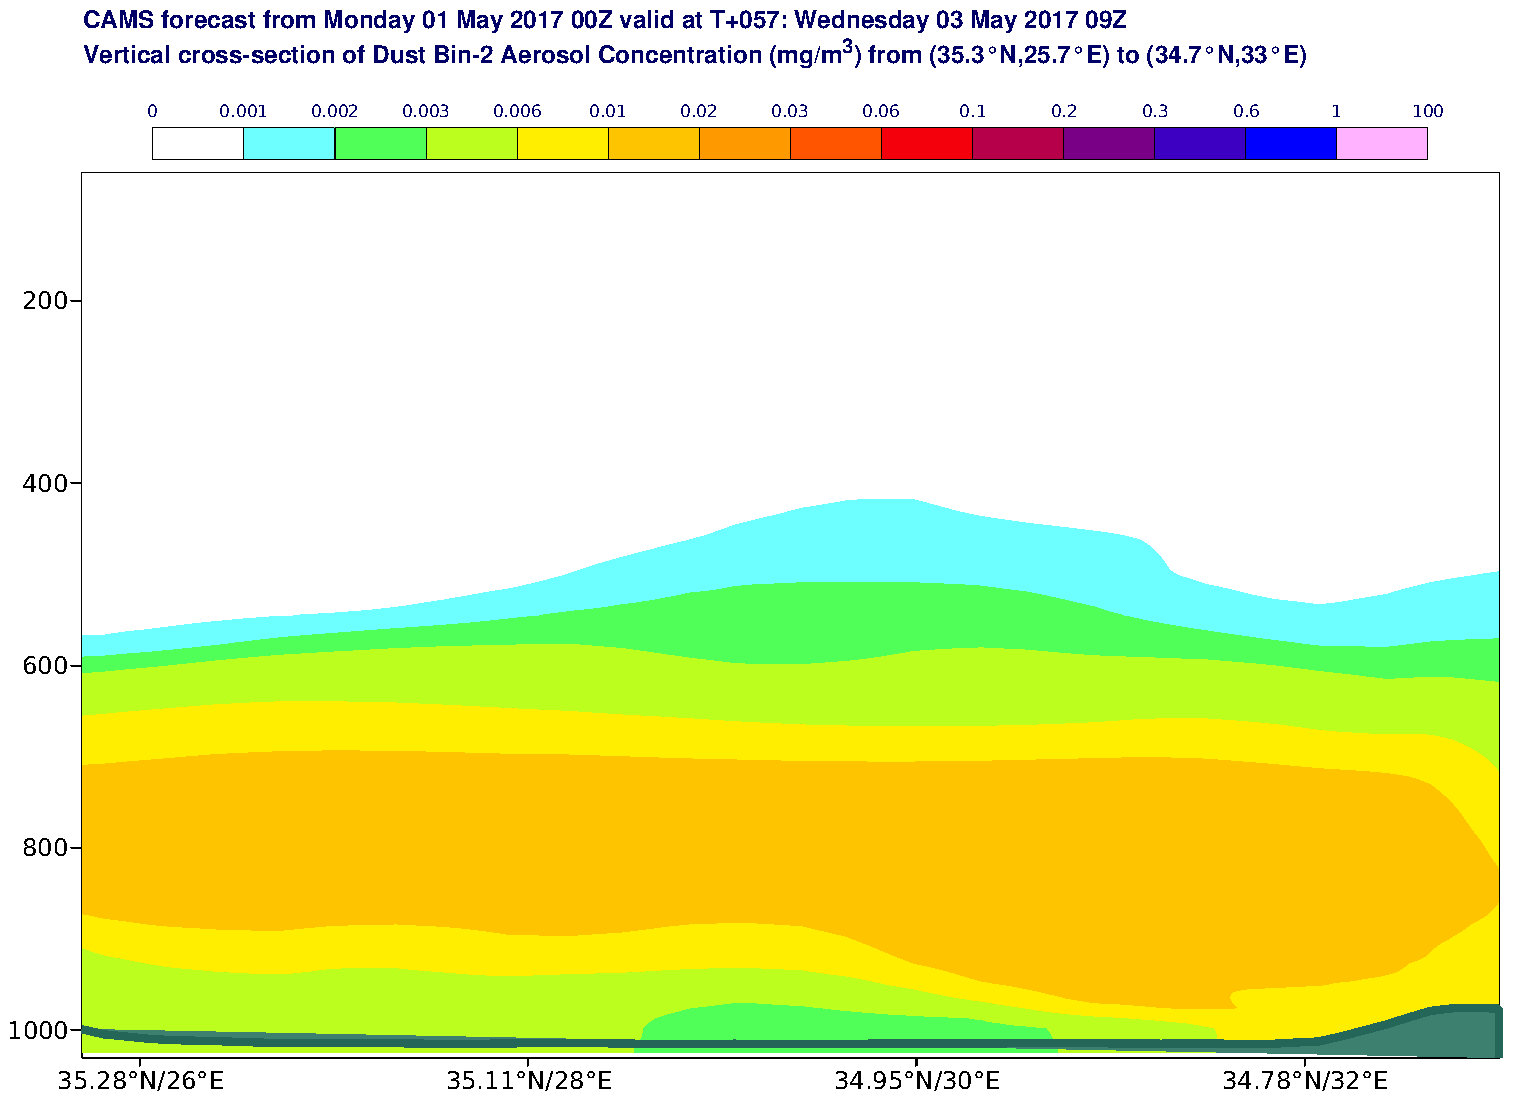 Vertical cross-section of Dust Bin-2 Aerosol Concentration (mg/m3) valid at T57 - 2017-05-03 09:00